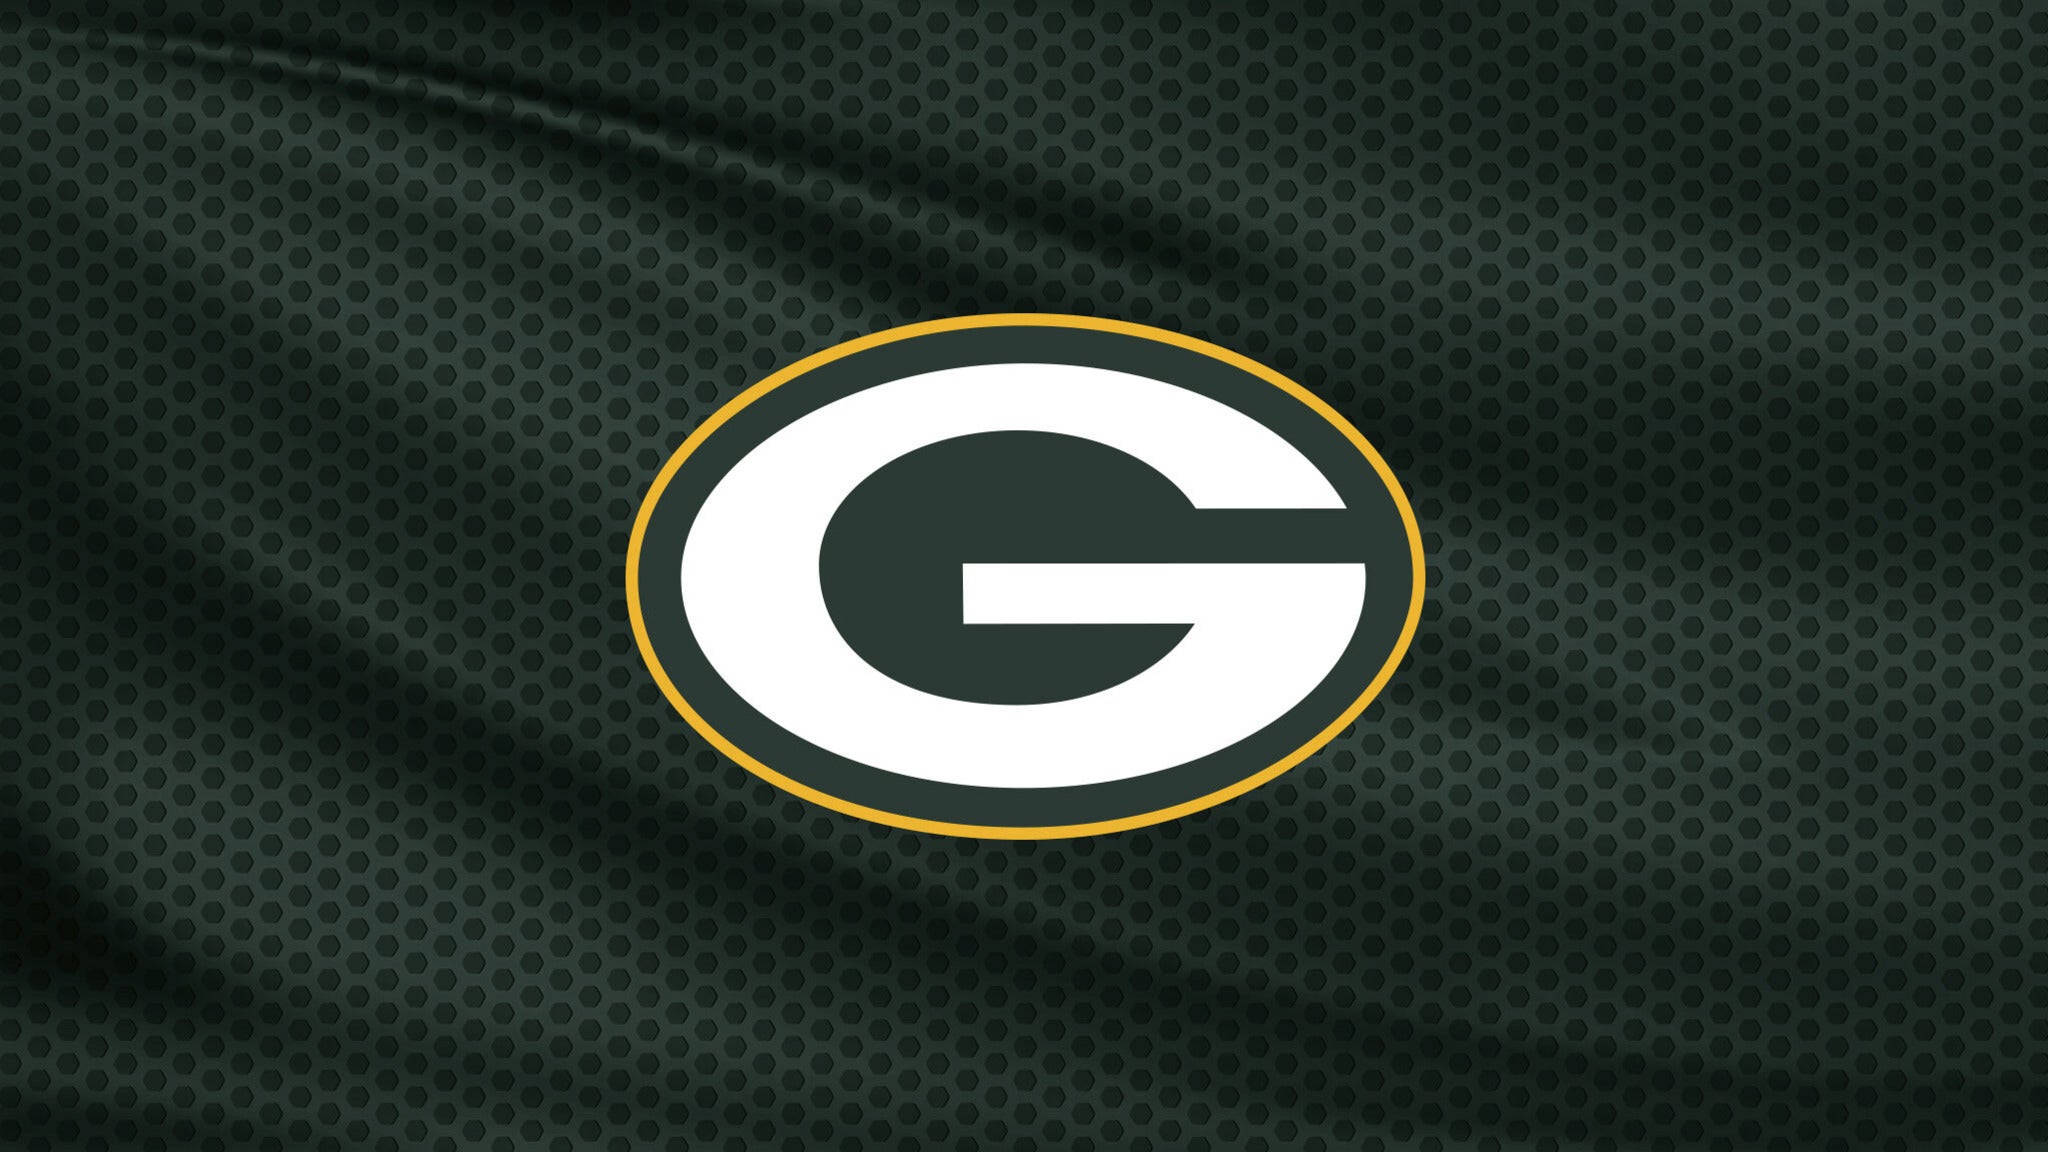 game green bay packers